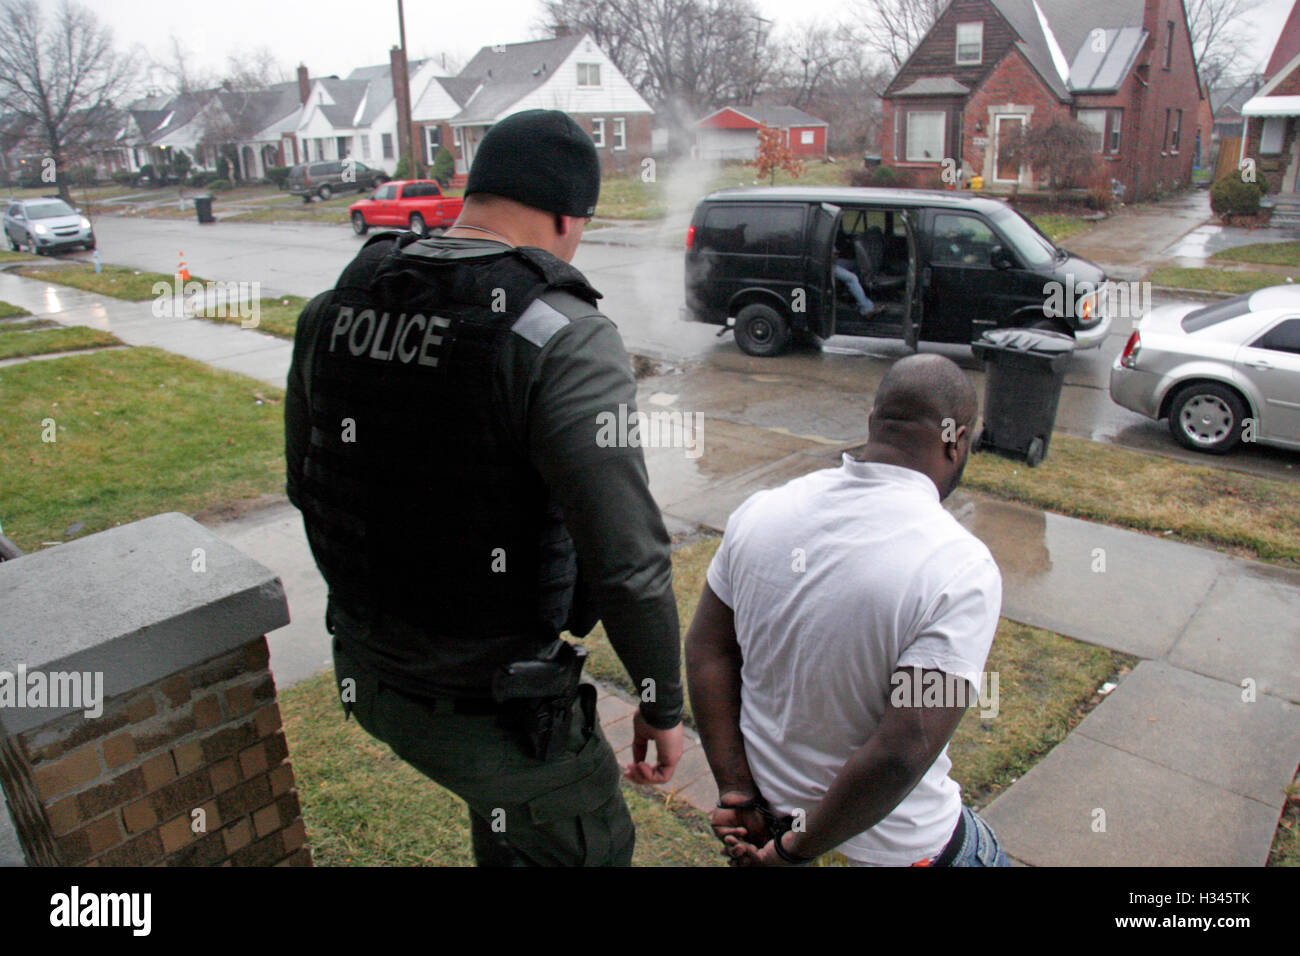 Police take away a handcuffed man after rading a suspected drug house in Detroit, Michigan, USA Stock Photo